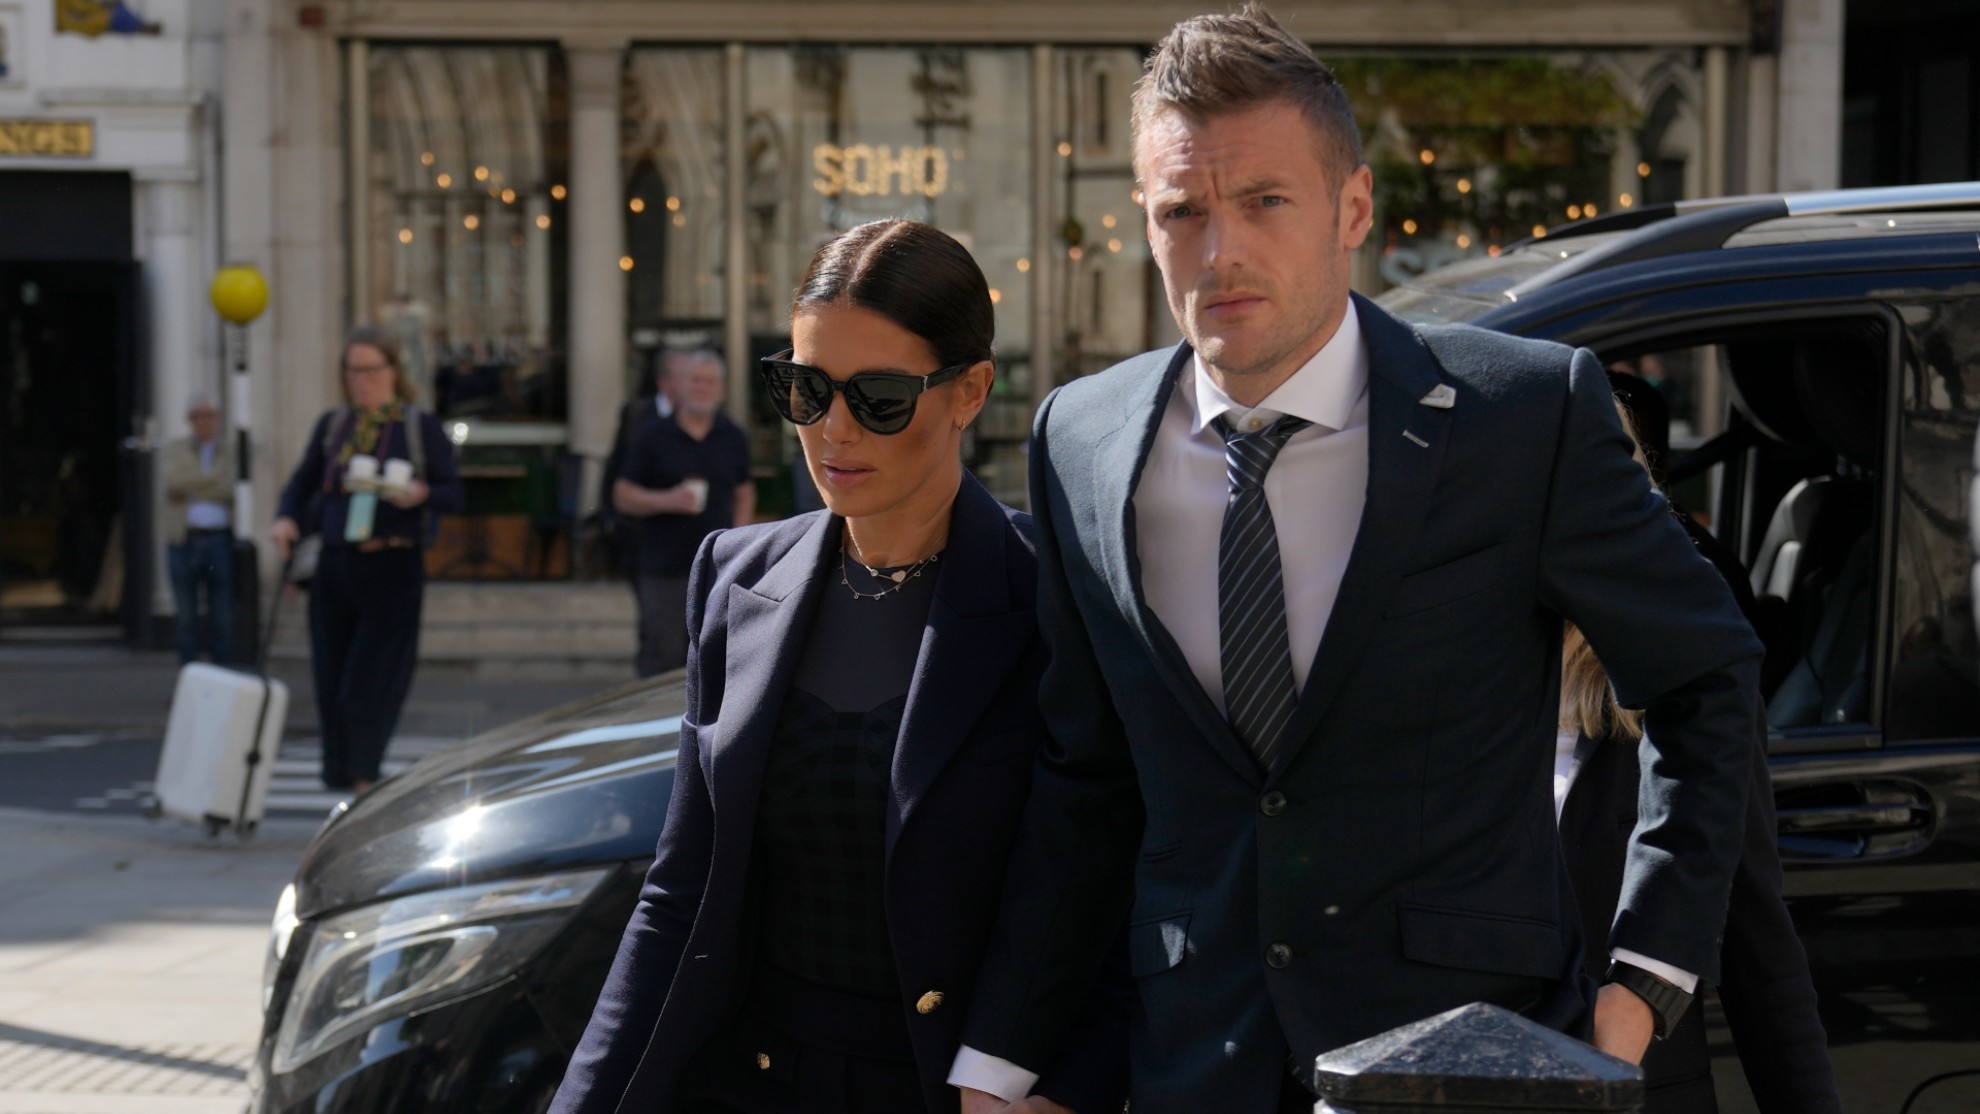 Leicester City and England soccer player Jamie Vardy, and his wife Rebekah Vardy.